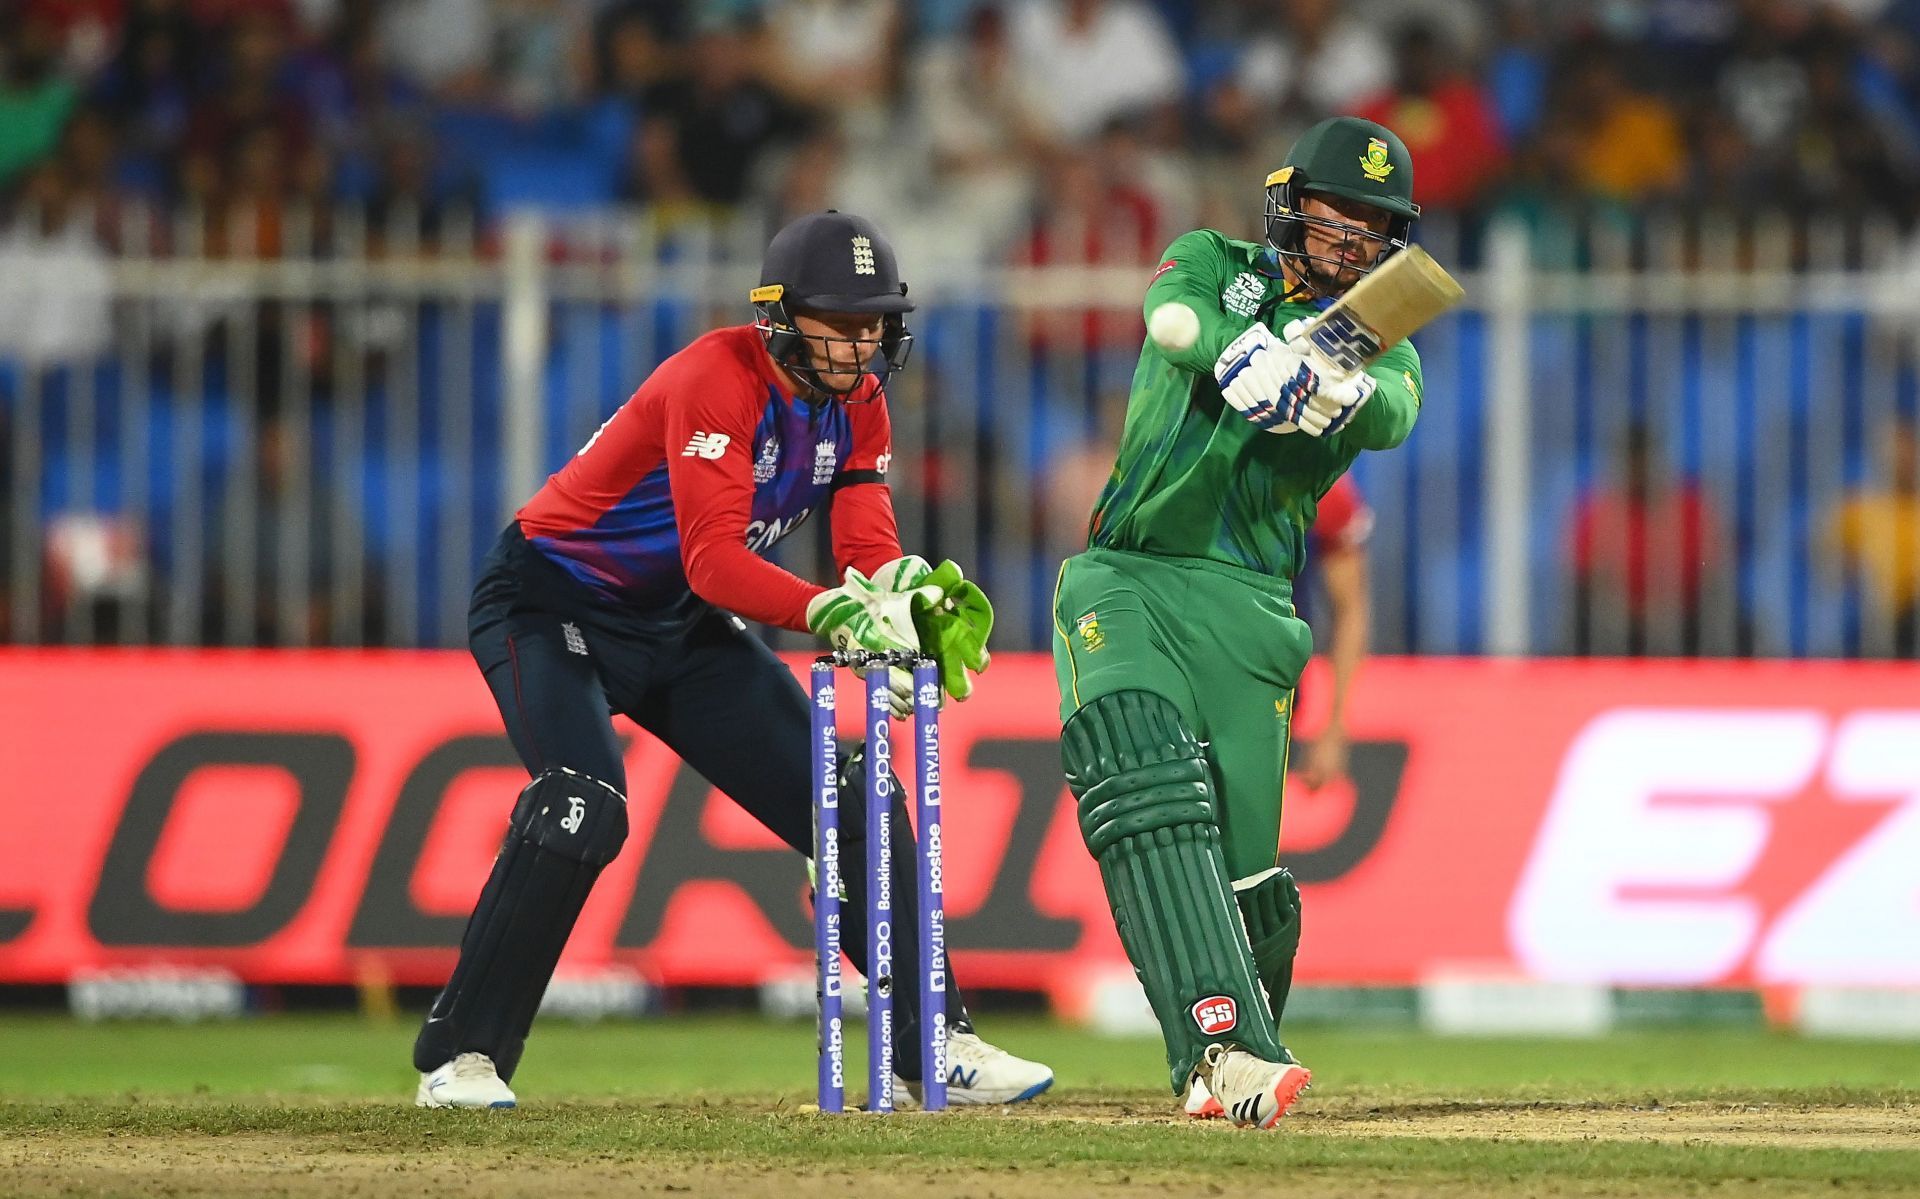 Quinton de Kock will have to play a big knock to eliminate England